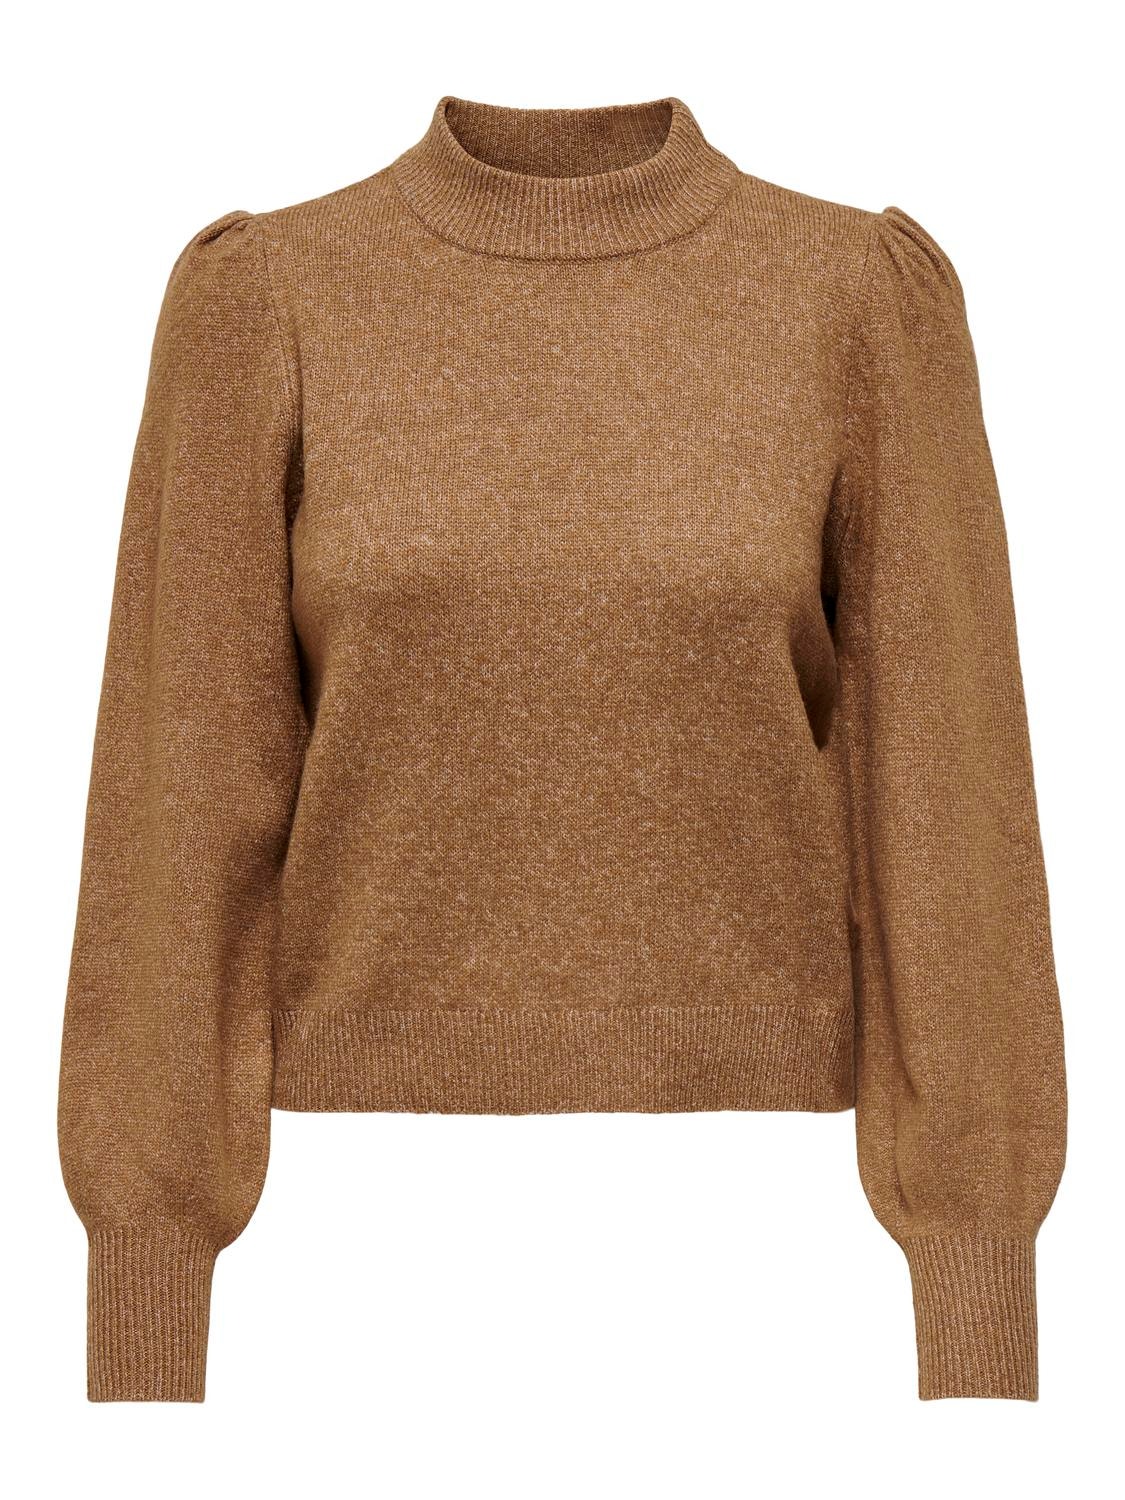 ONLY Knit Fit Round Neck High cuffs Balloon sleeves Pullover -Toasted Coconut - 15216638